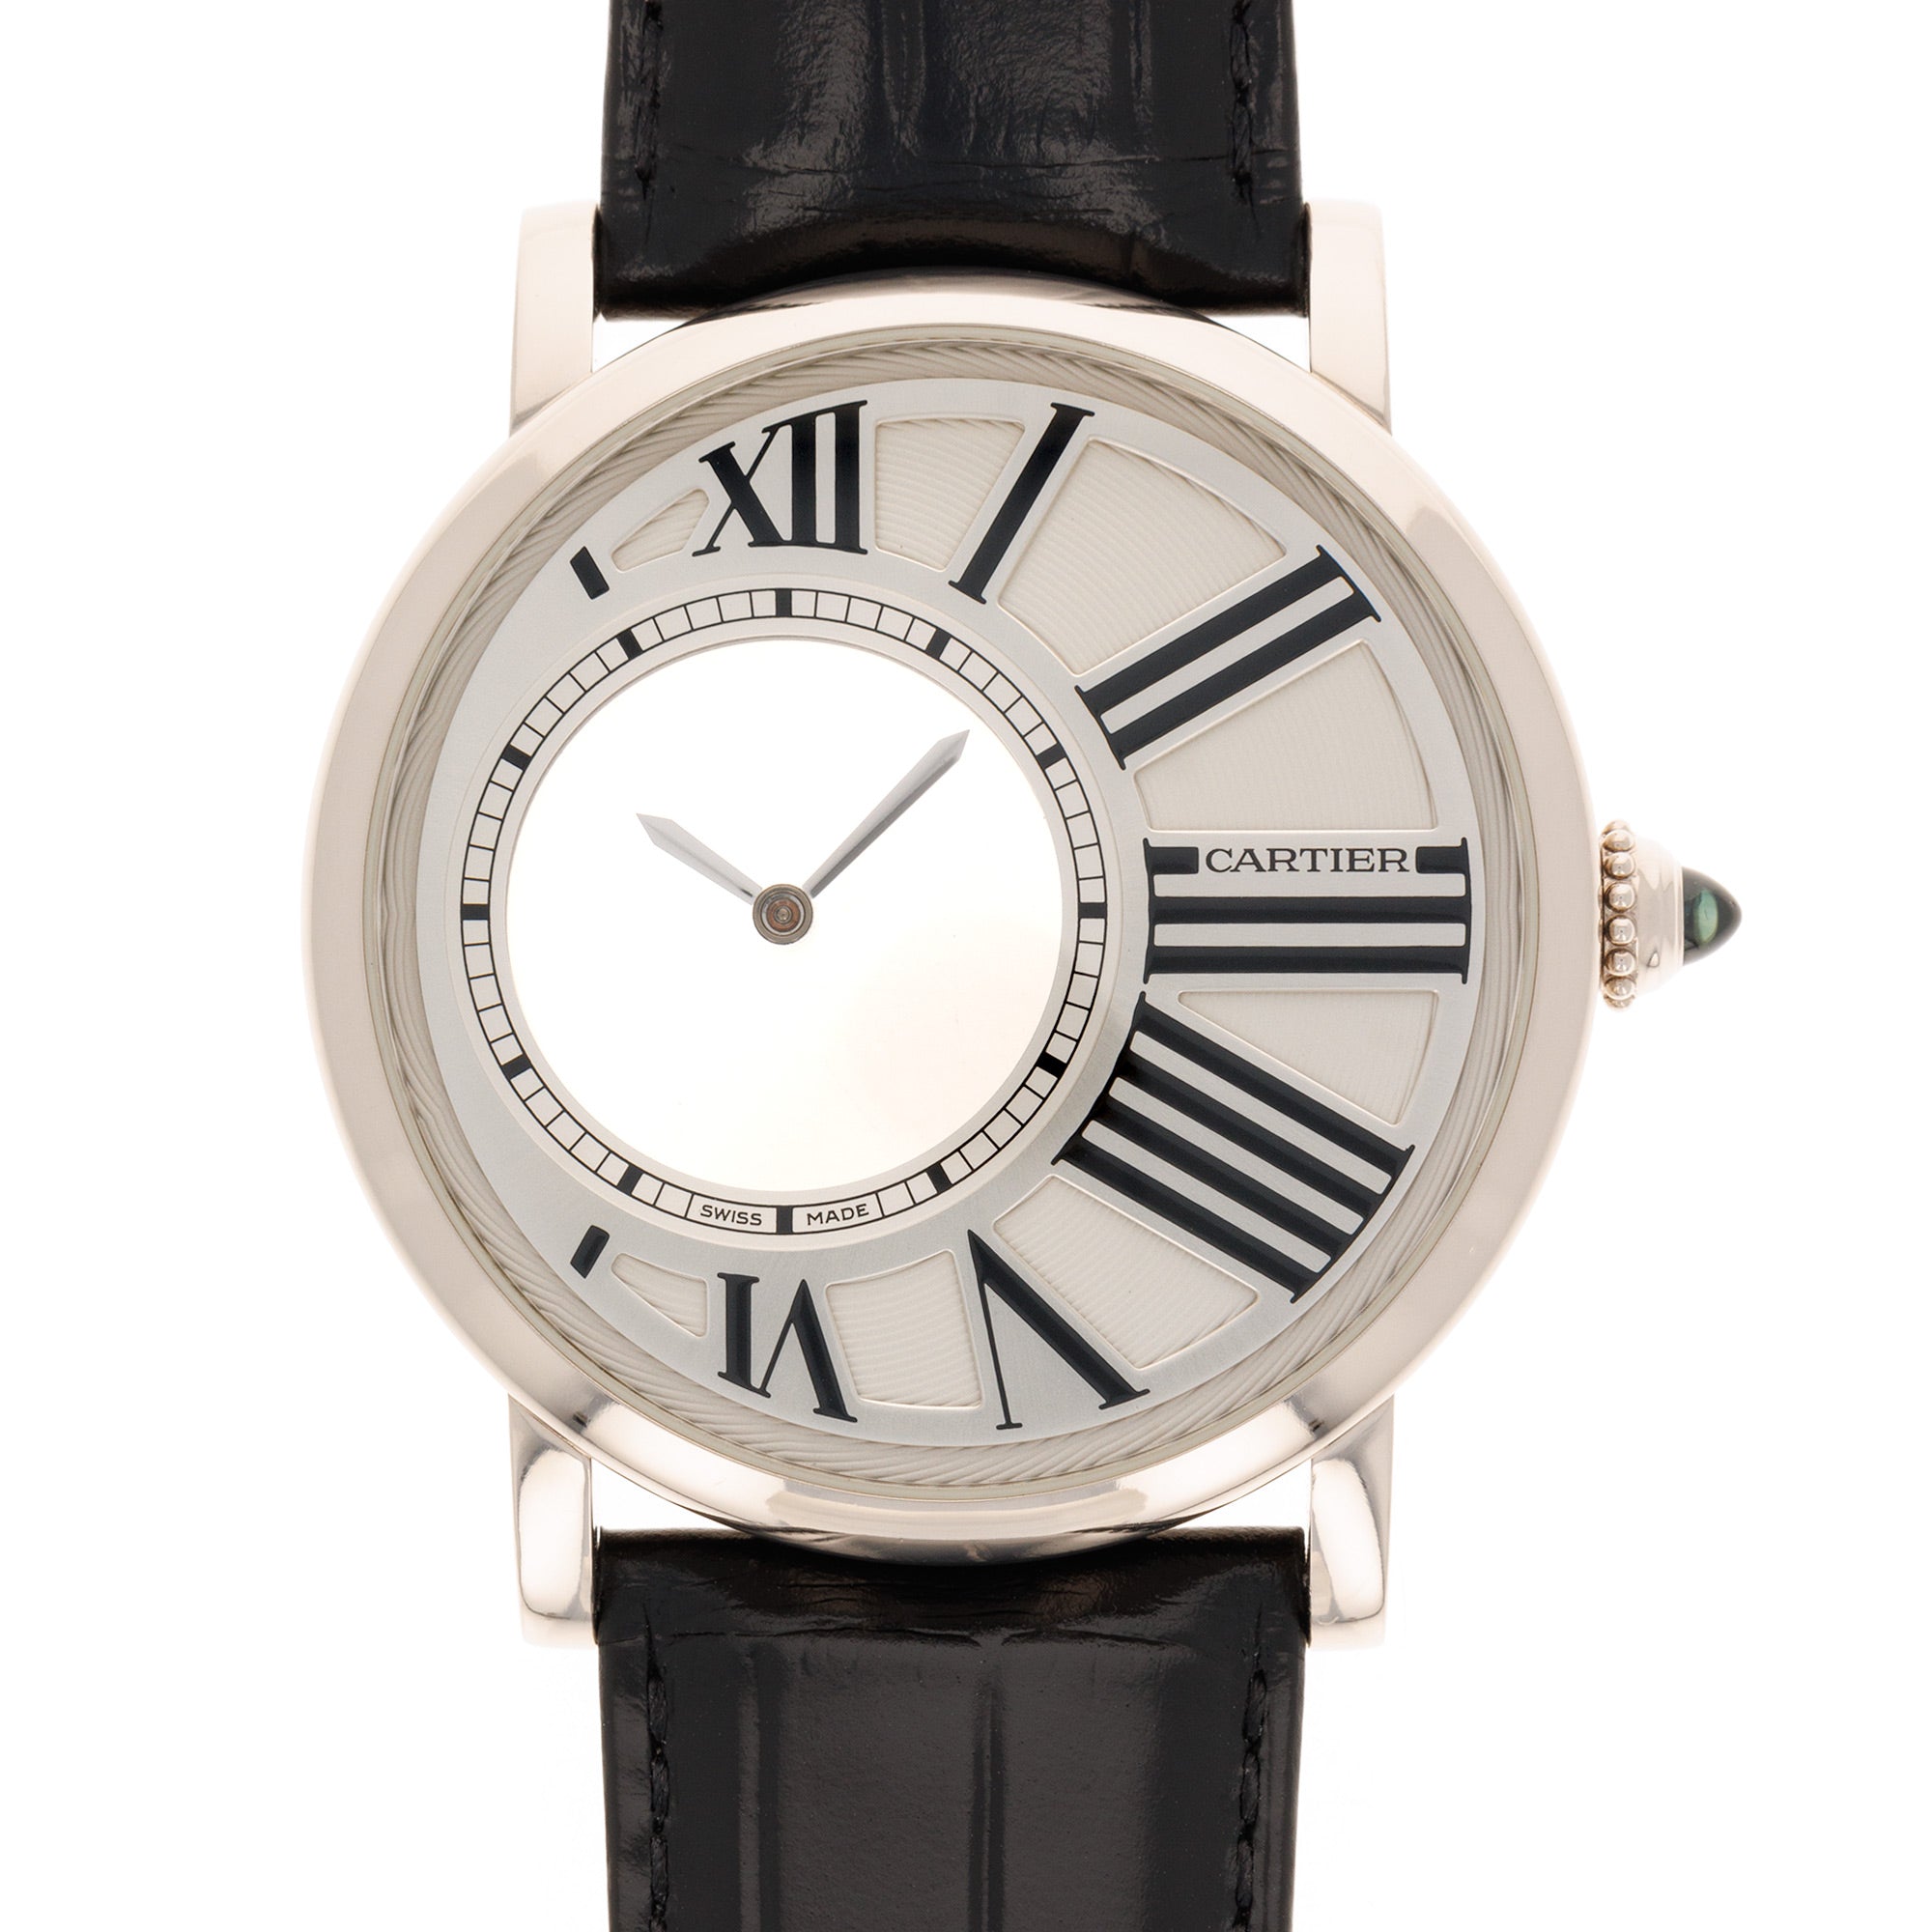 Cartier - Cartier White Gold Rotonde Mystery Ref. W1556224 - The Keystone Watches